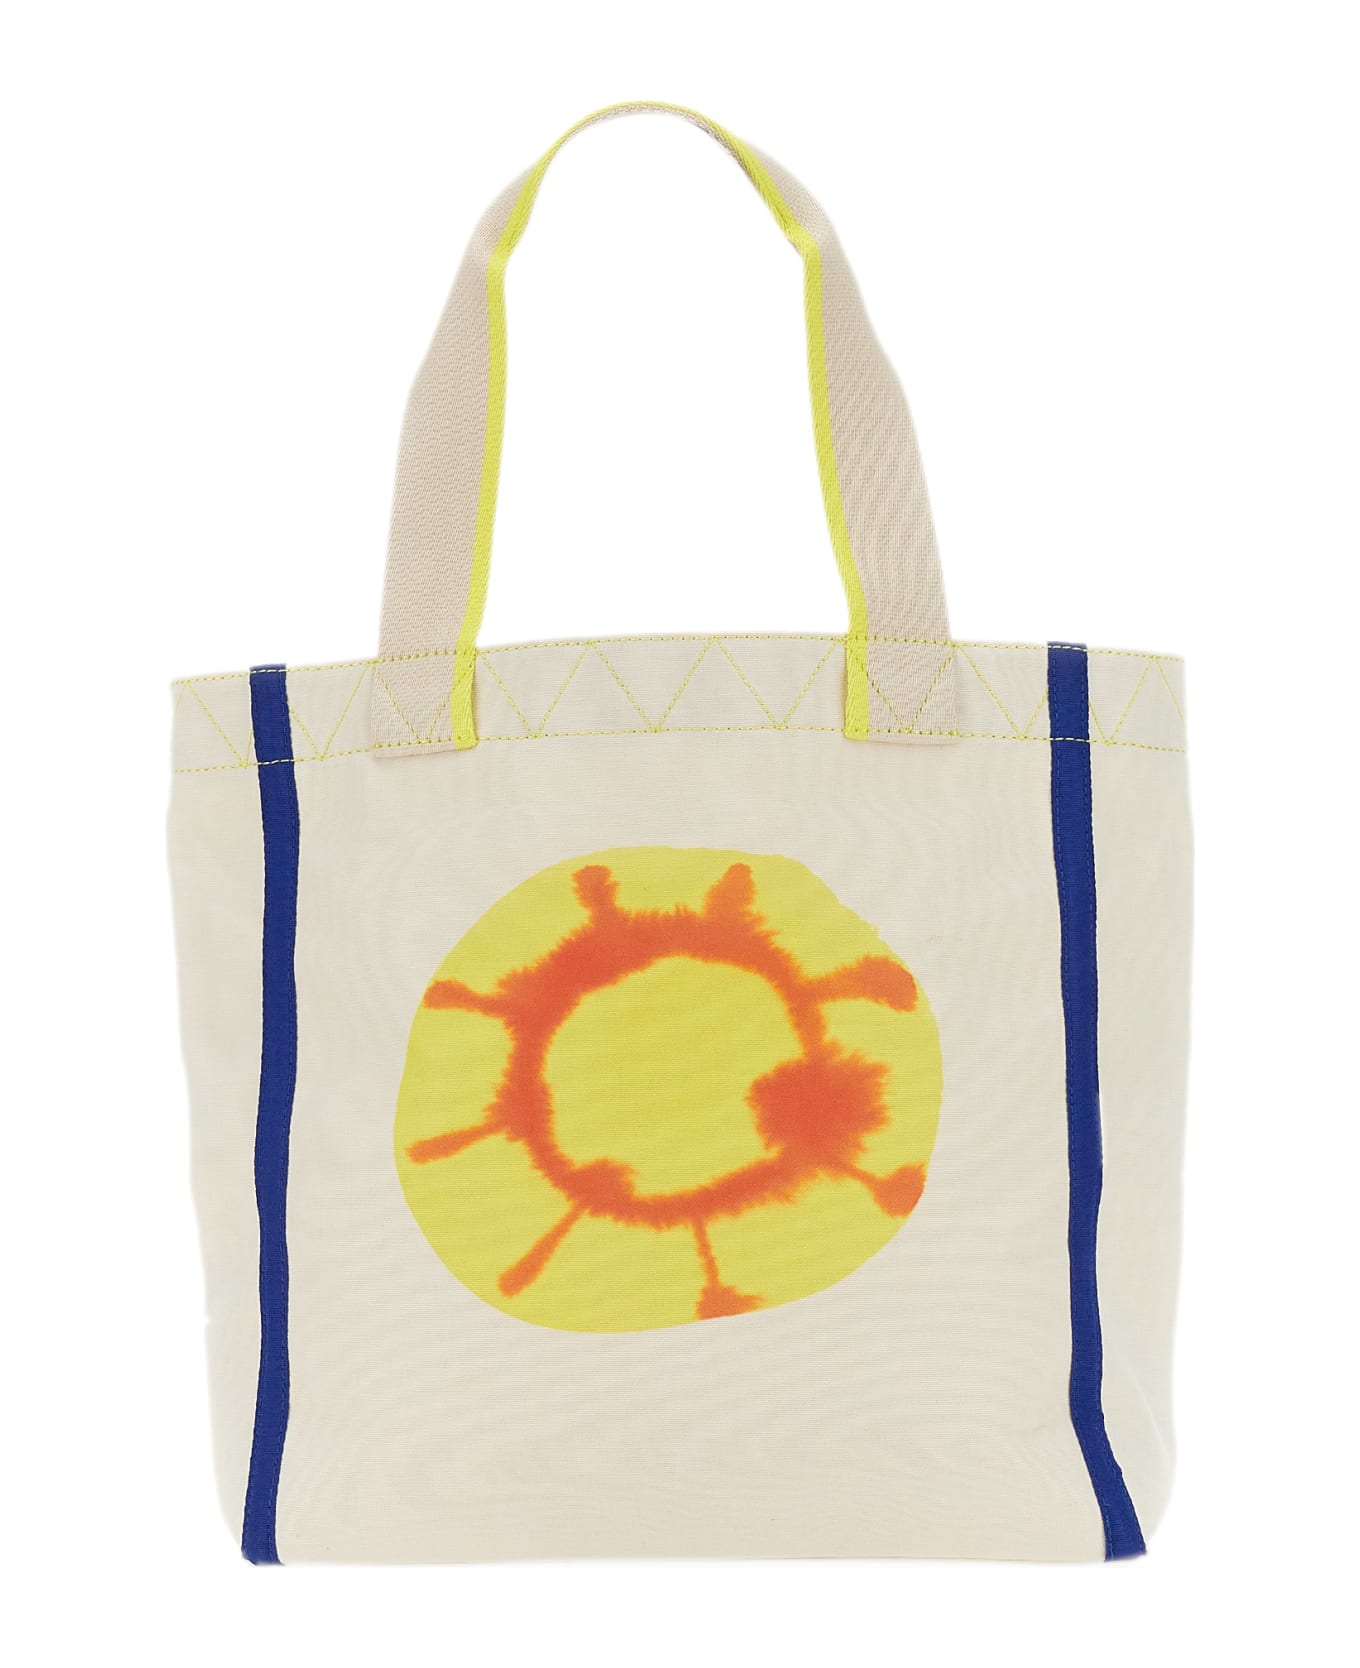 PS by Paul Smith Recycled Fabric Tote Bag - AVORIO